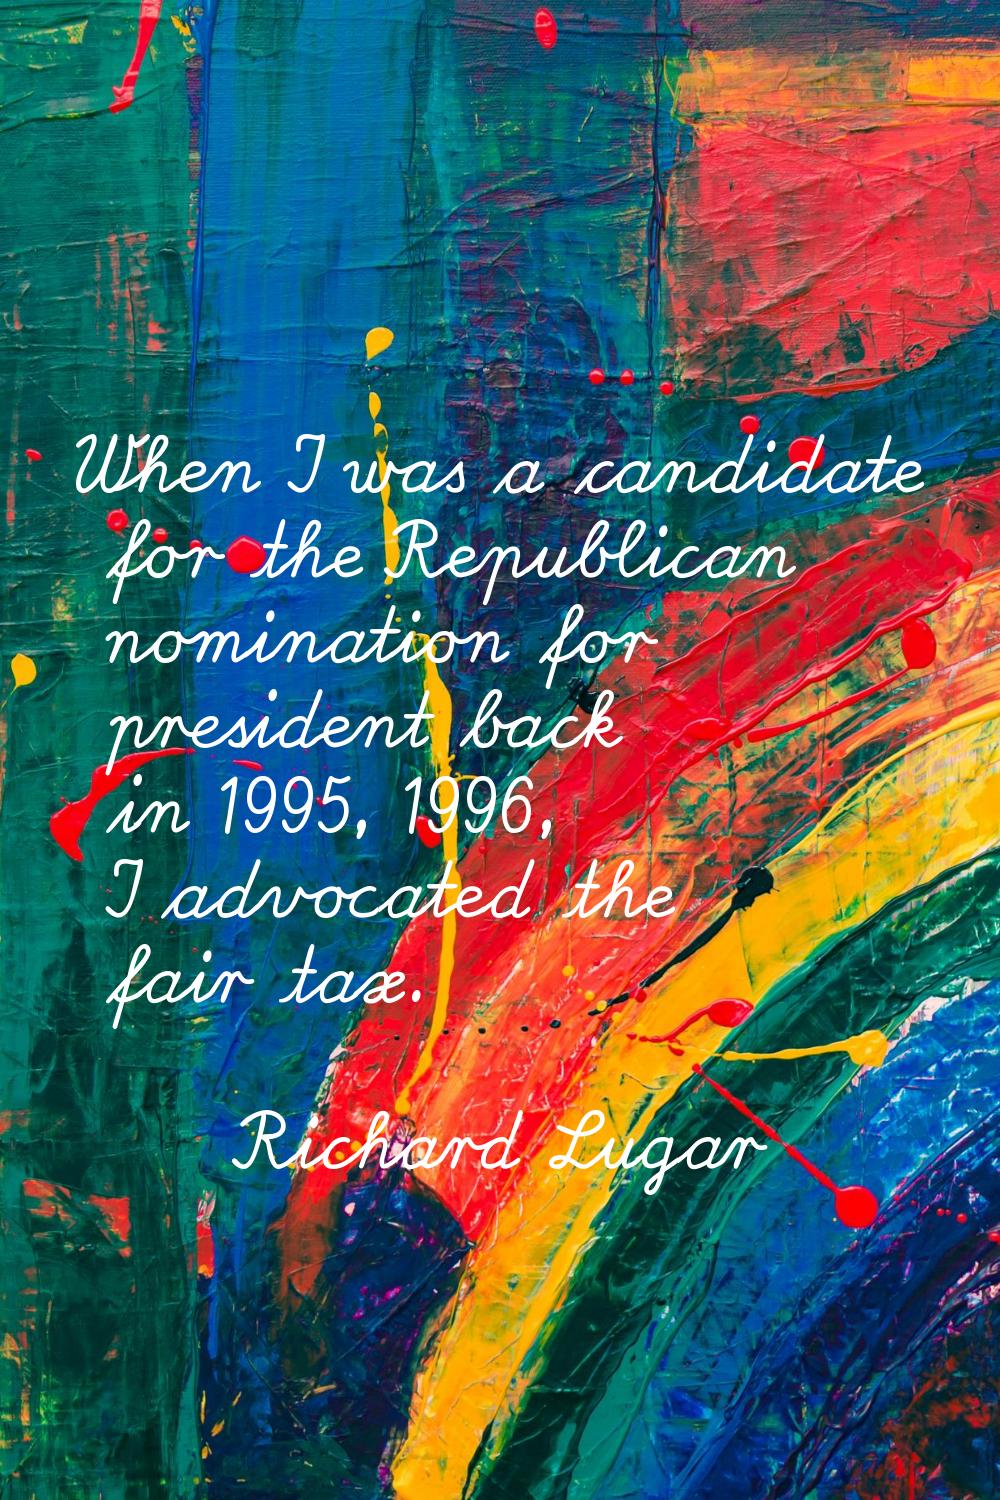 When I was a candidate for the Republican nomination for president back in 1995, 1996, I advocated 